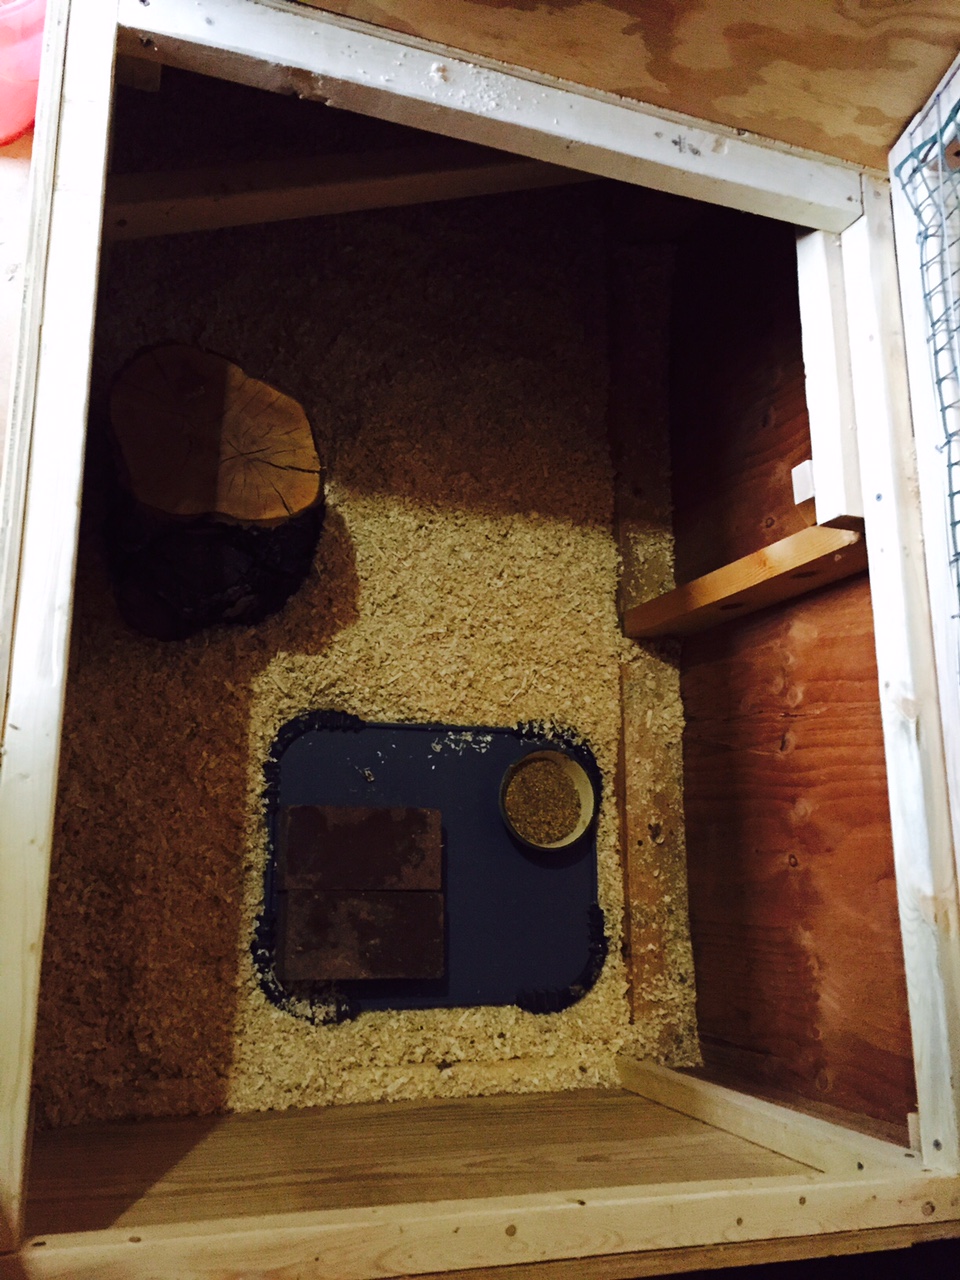 Brooder space, looking down through the top.  Space extends under the nest box to the coop.